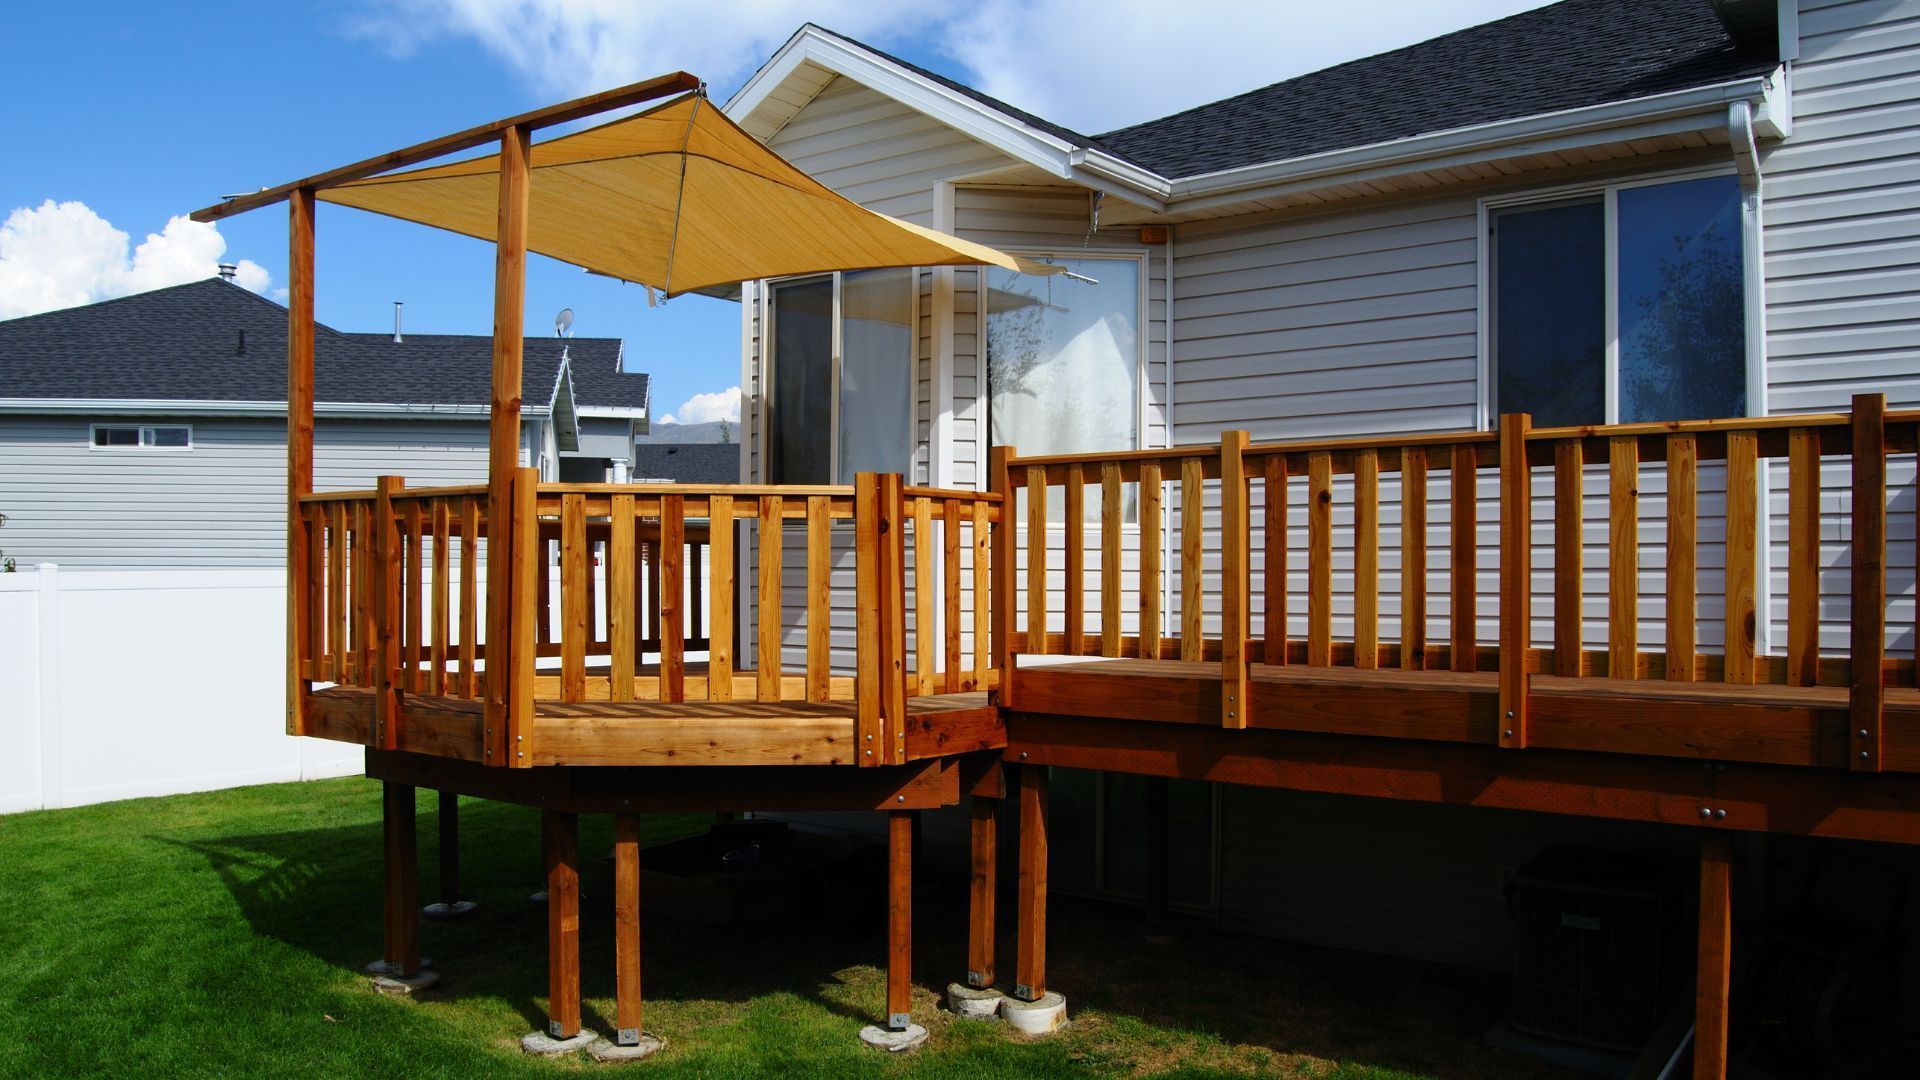 A new wooden deck with railings and sunshade is in a suburban Athens, GA, backyard.